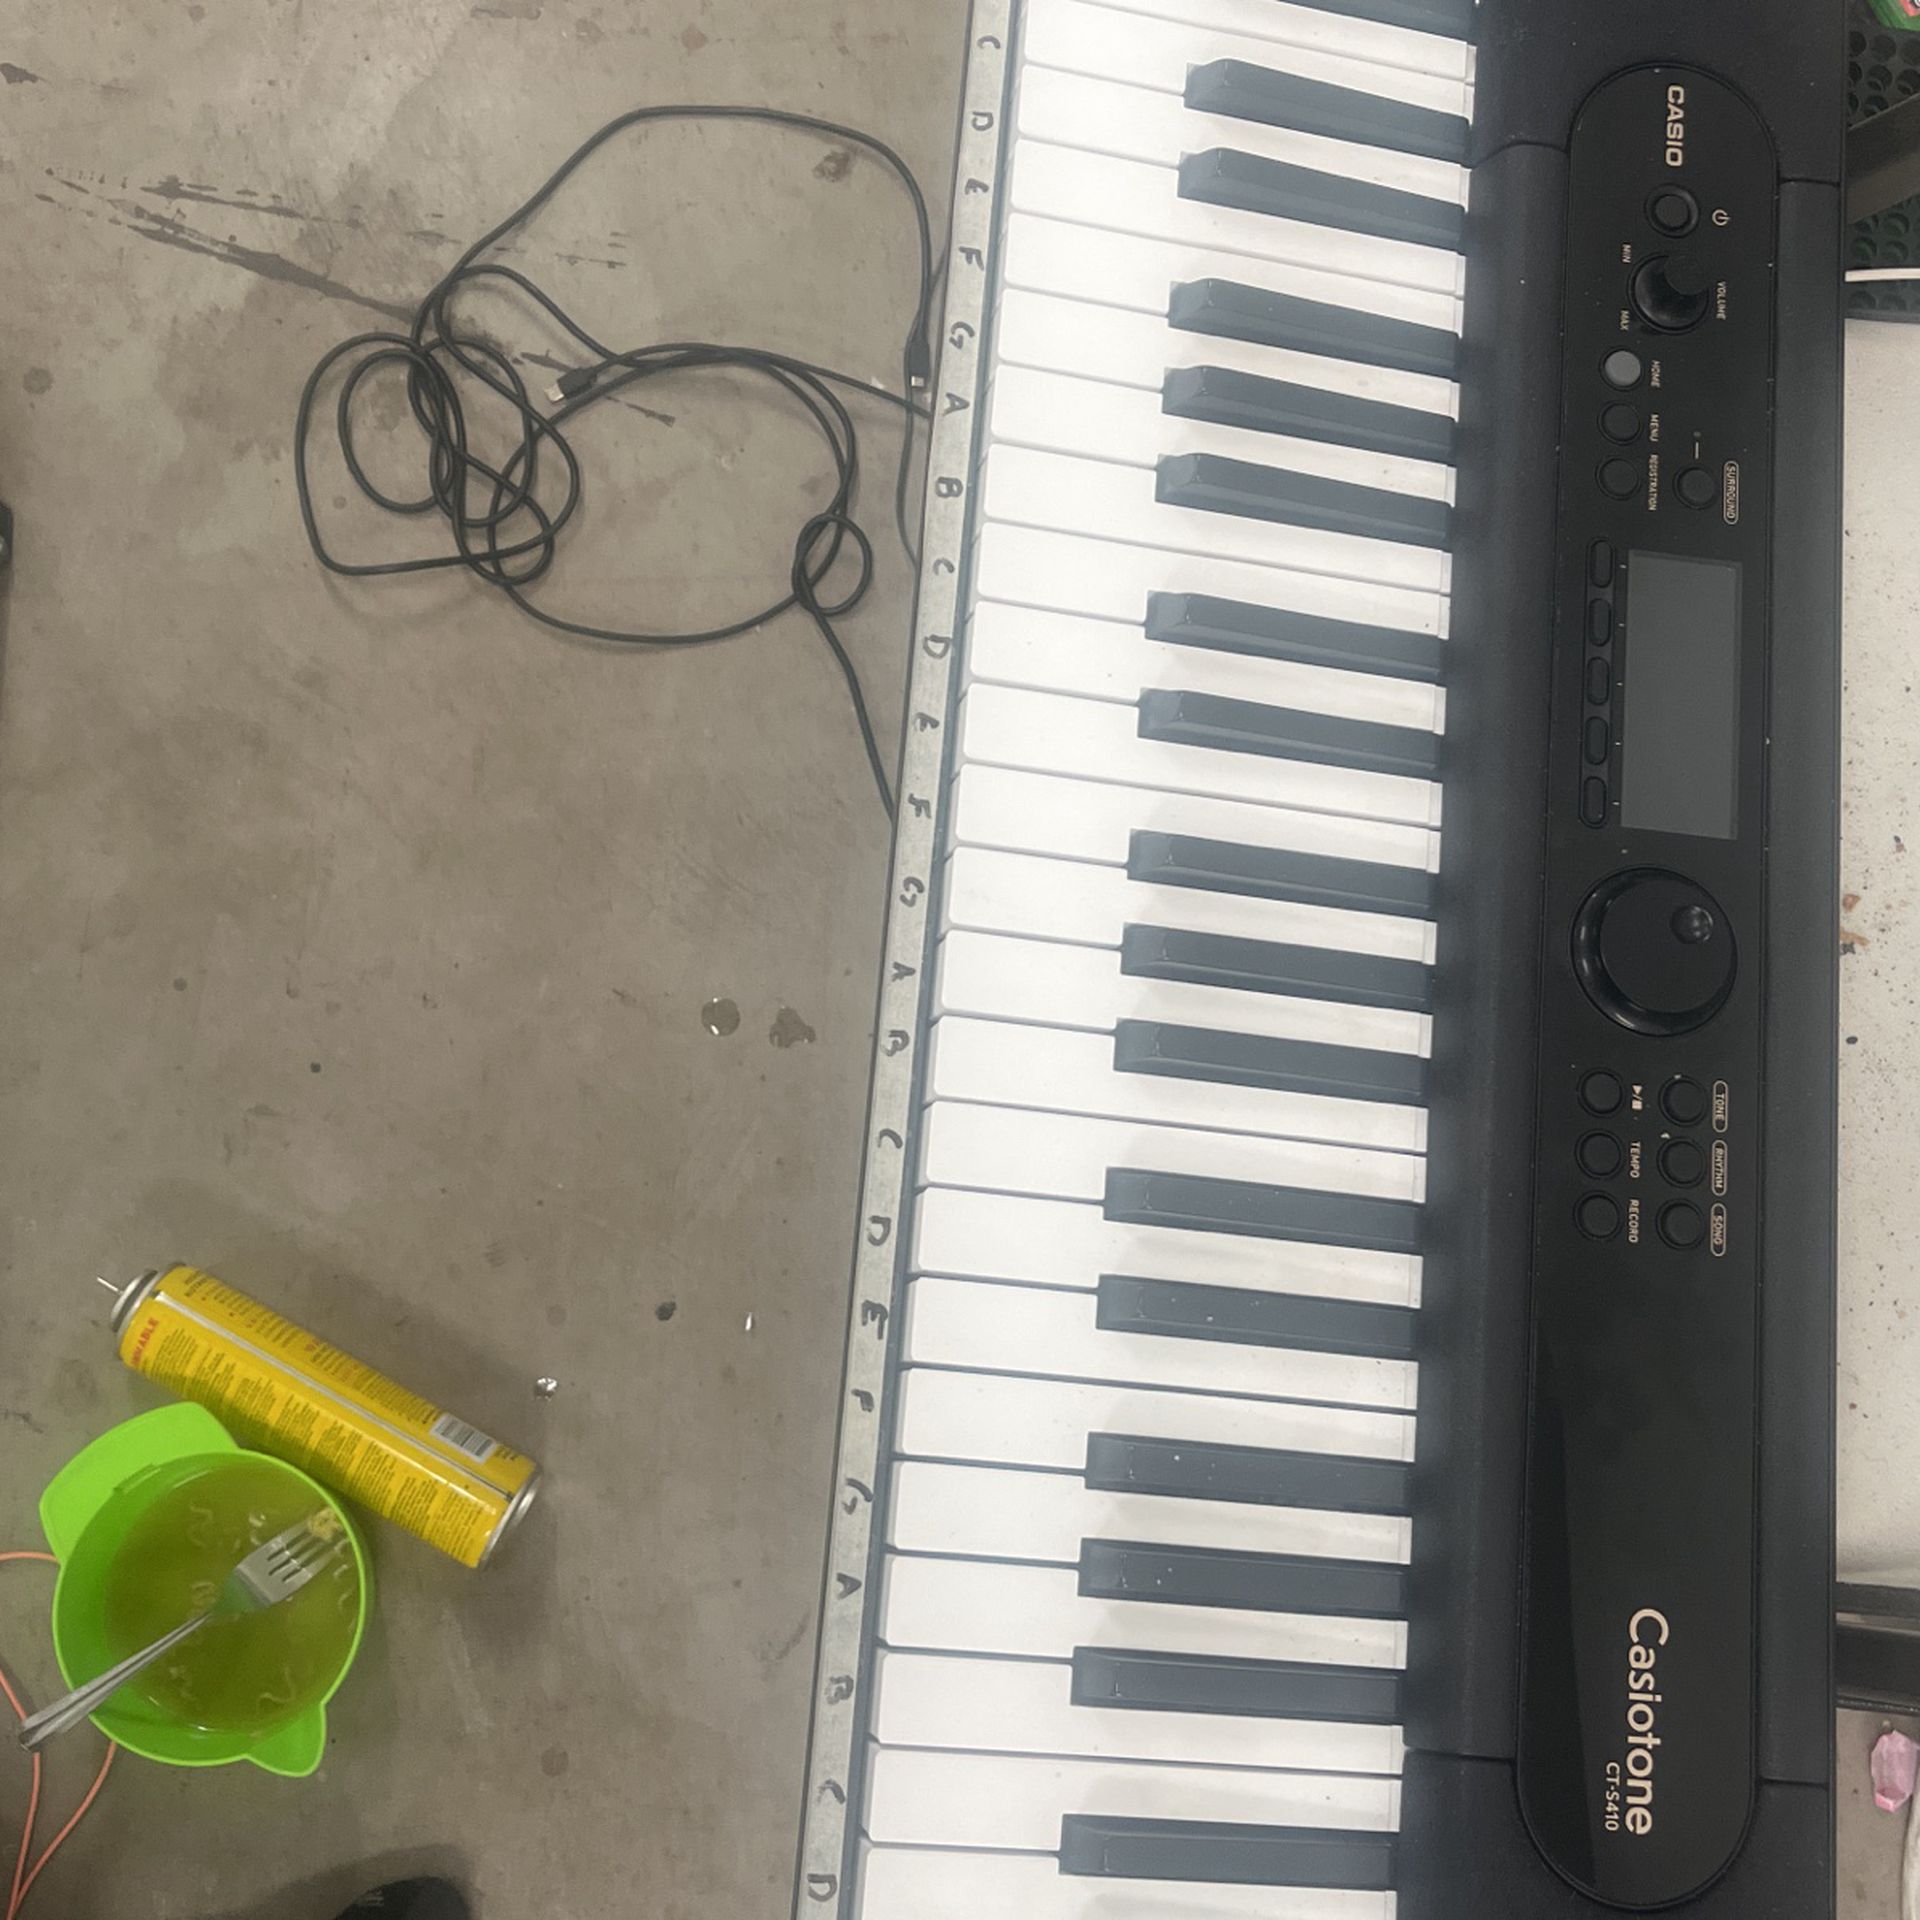 Casiotone CT-S410 For Sale. Barely Used. Need To Sell ASAP. 